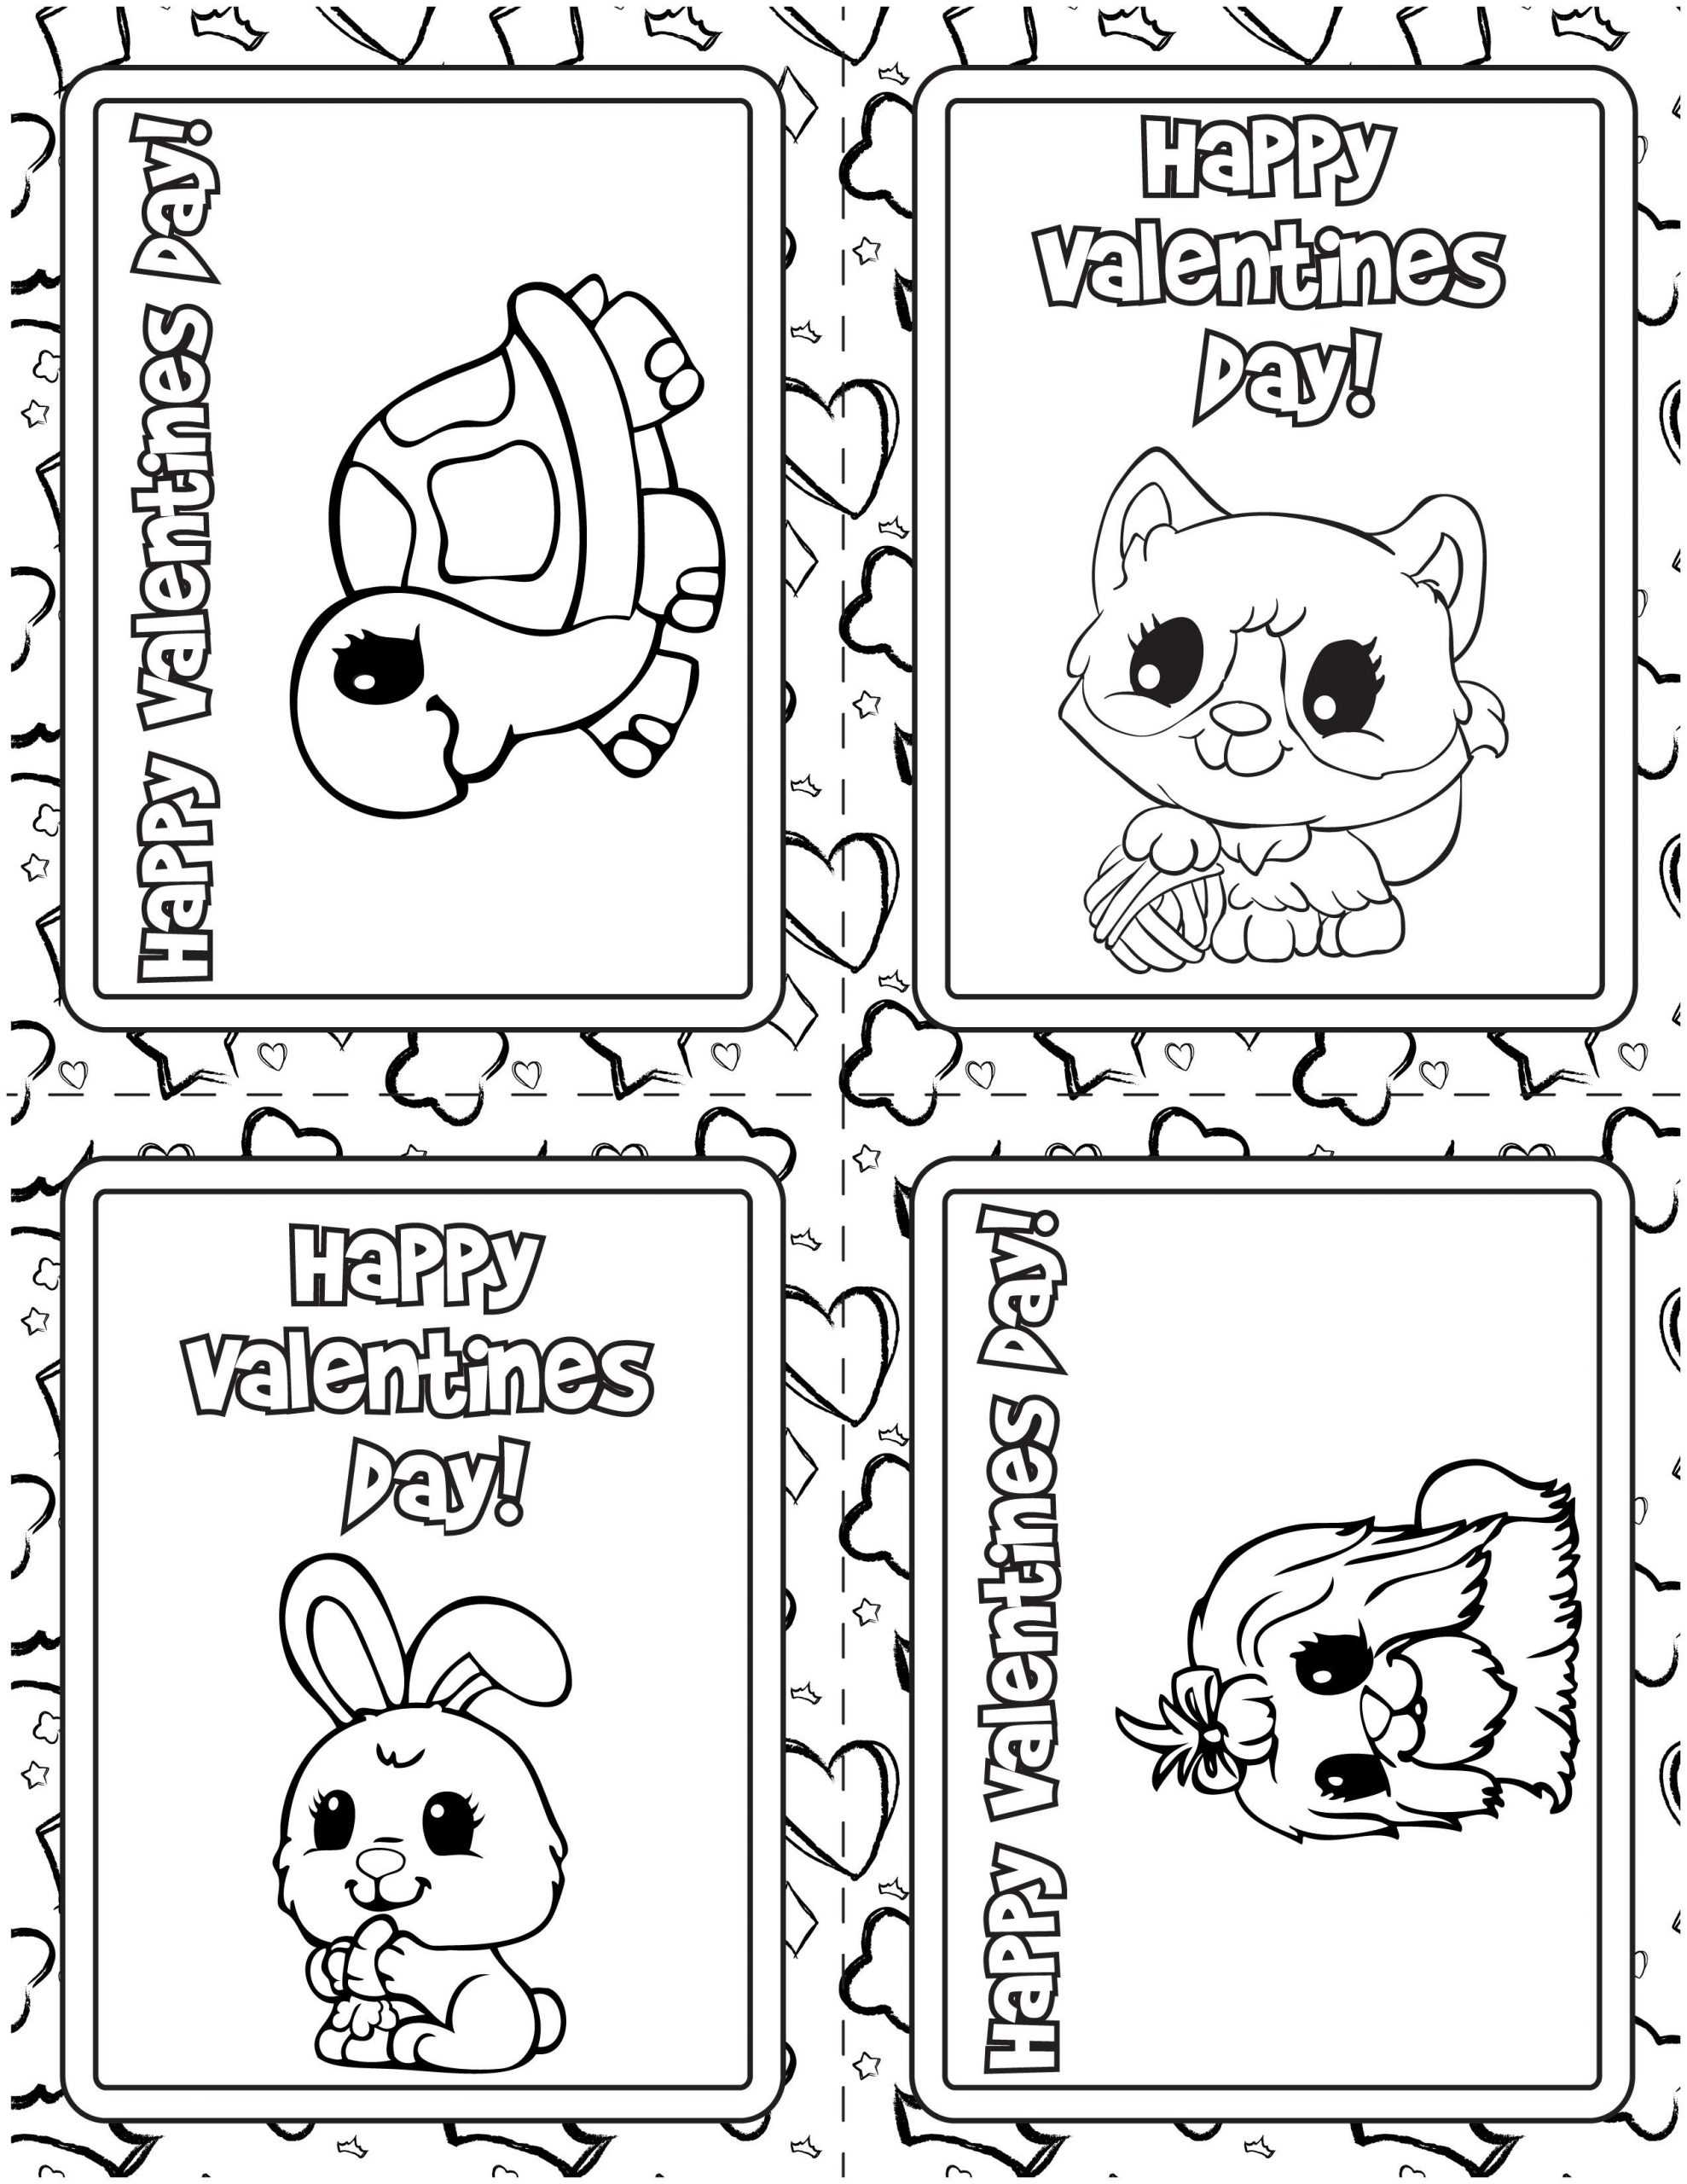 Coloring Pages : Coloringges Astonishing Valentines Day Regarding Valentine Card Template For Kids